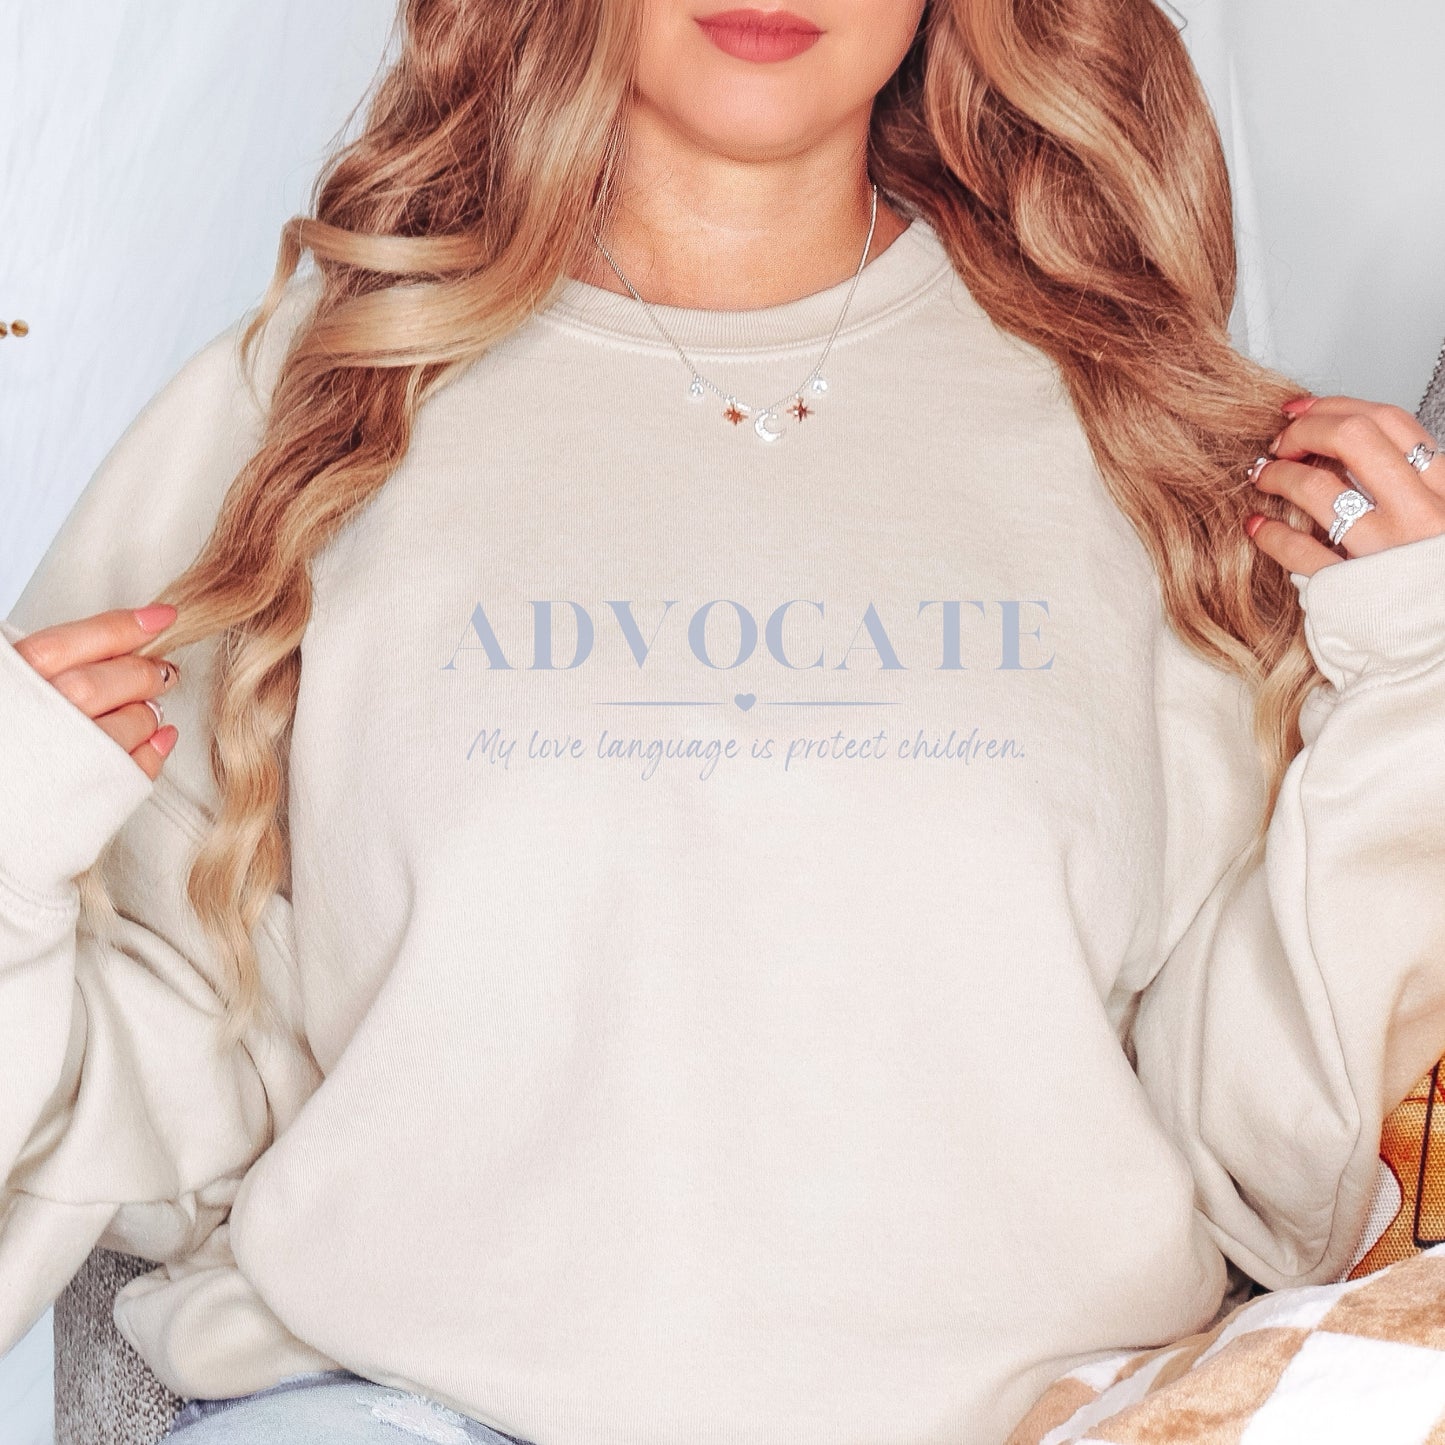 Front and center, the bold message declares, "ADVOCATE: my love language is protect children." This impactful phrase encapsulates the essence of your commitment to safeguarding children and promoting their well-being. Perfect for child advocates, champions of children’s mental health, and for Child Abuse Awareness and Prevention Month